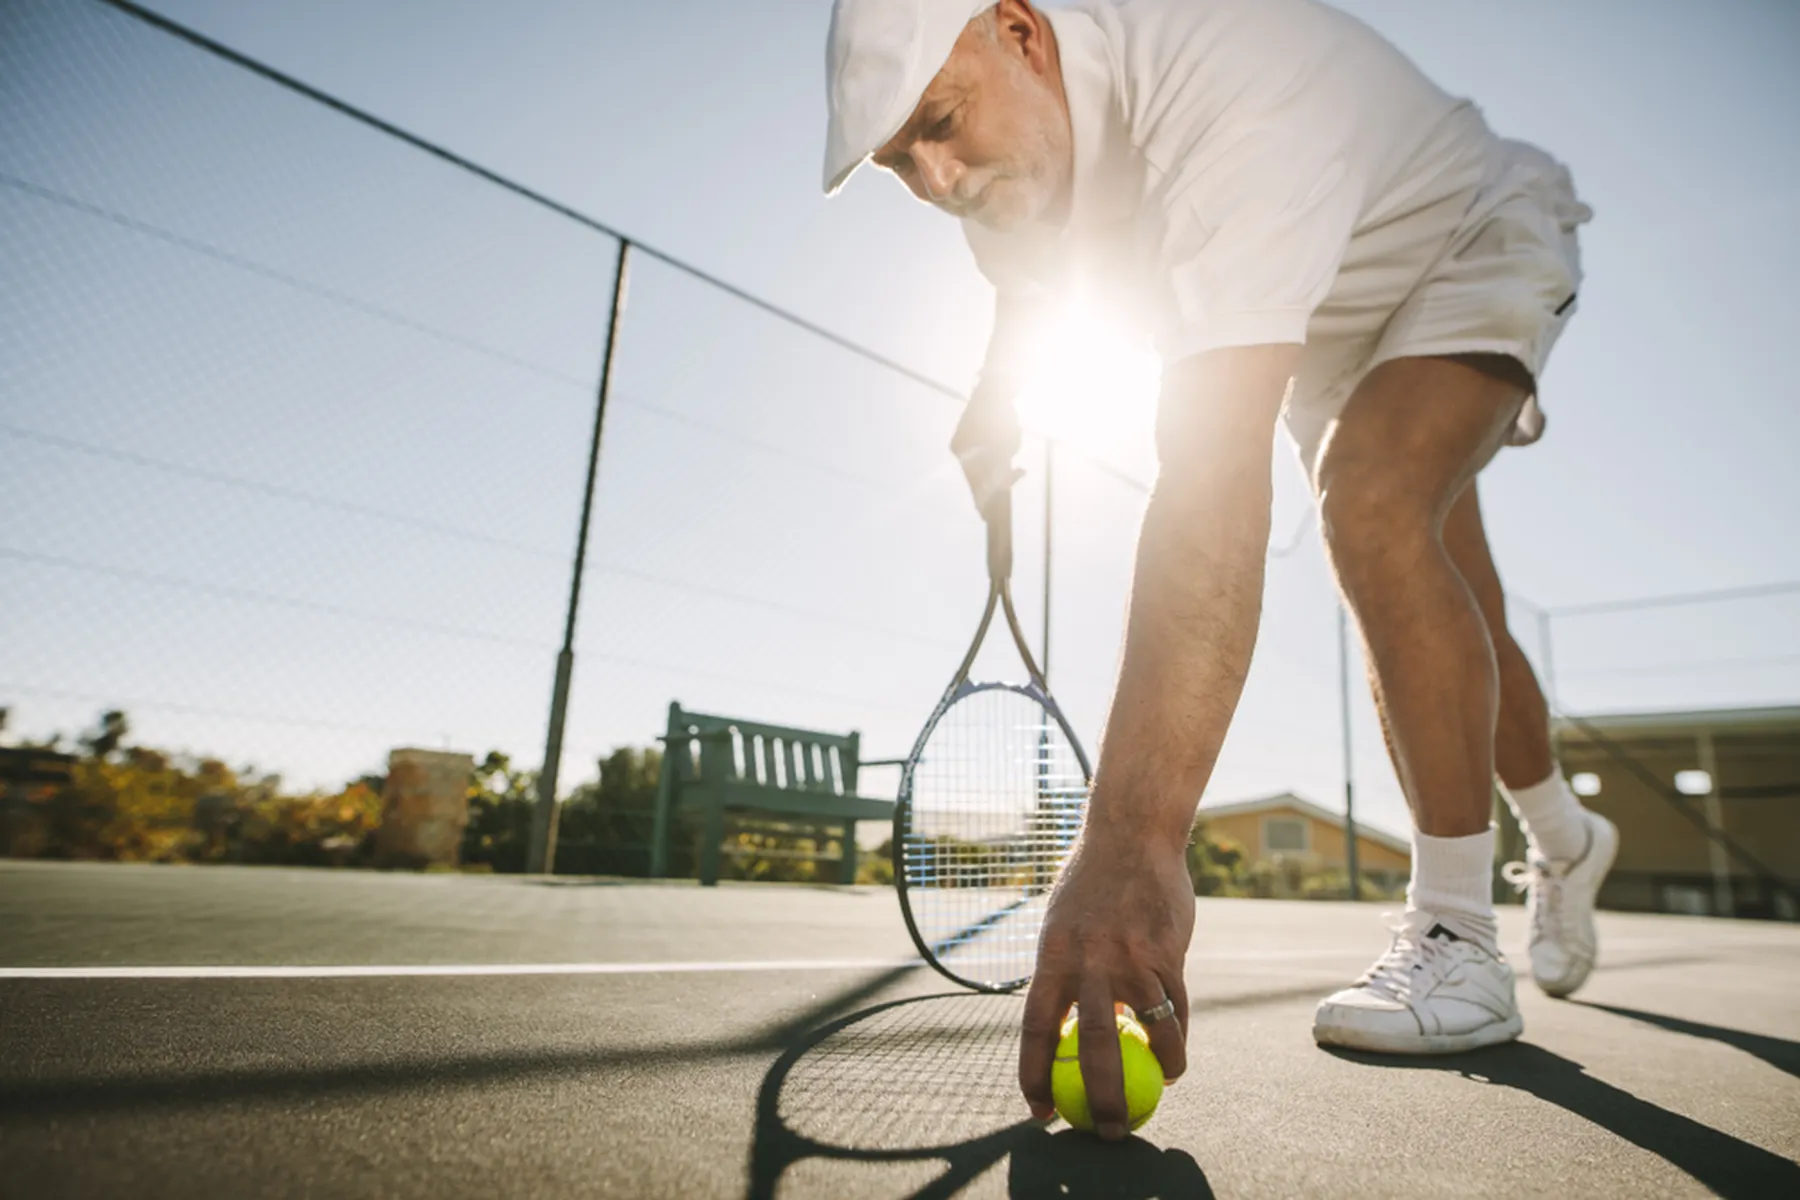 A man leans over to pick up a tennis ball.